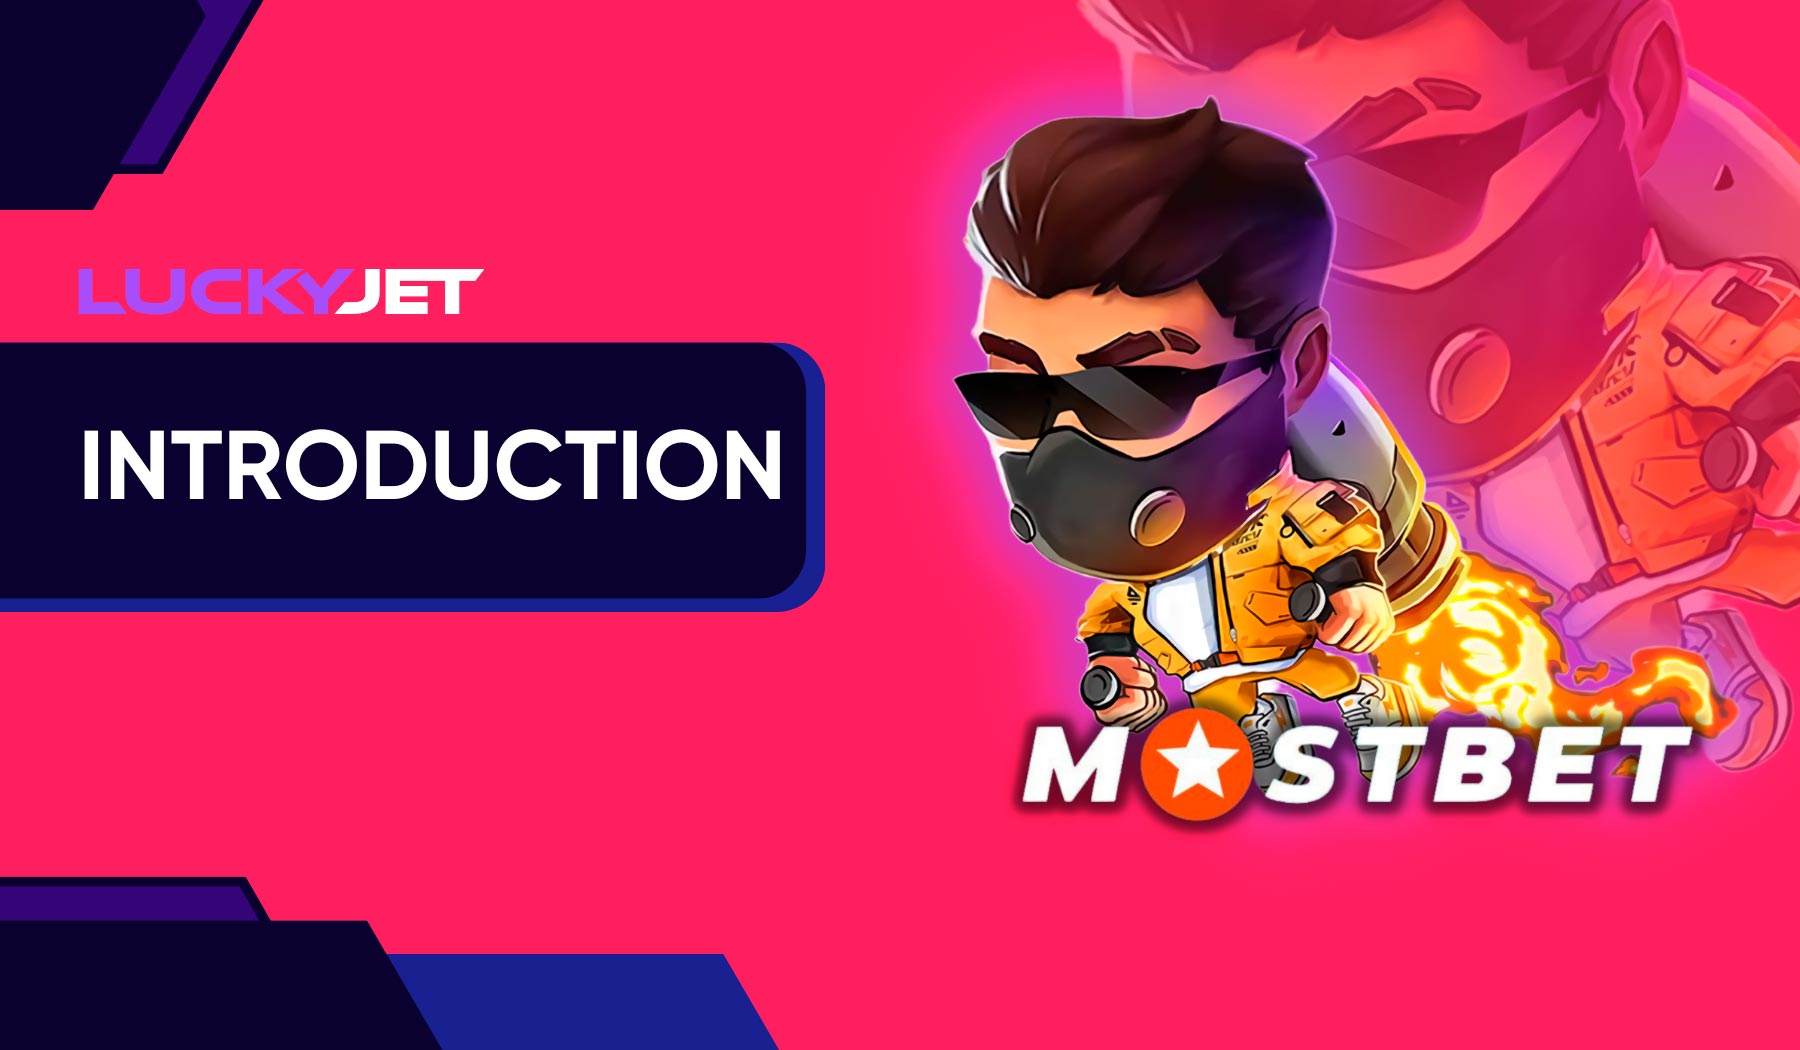 Mostbet represents a trend in gambling in the form of Lucky Jet